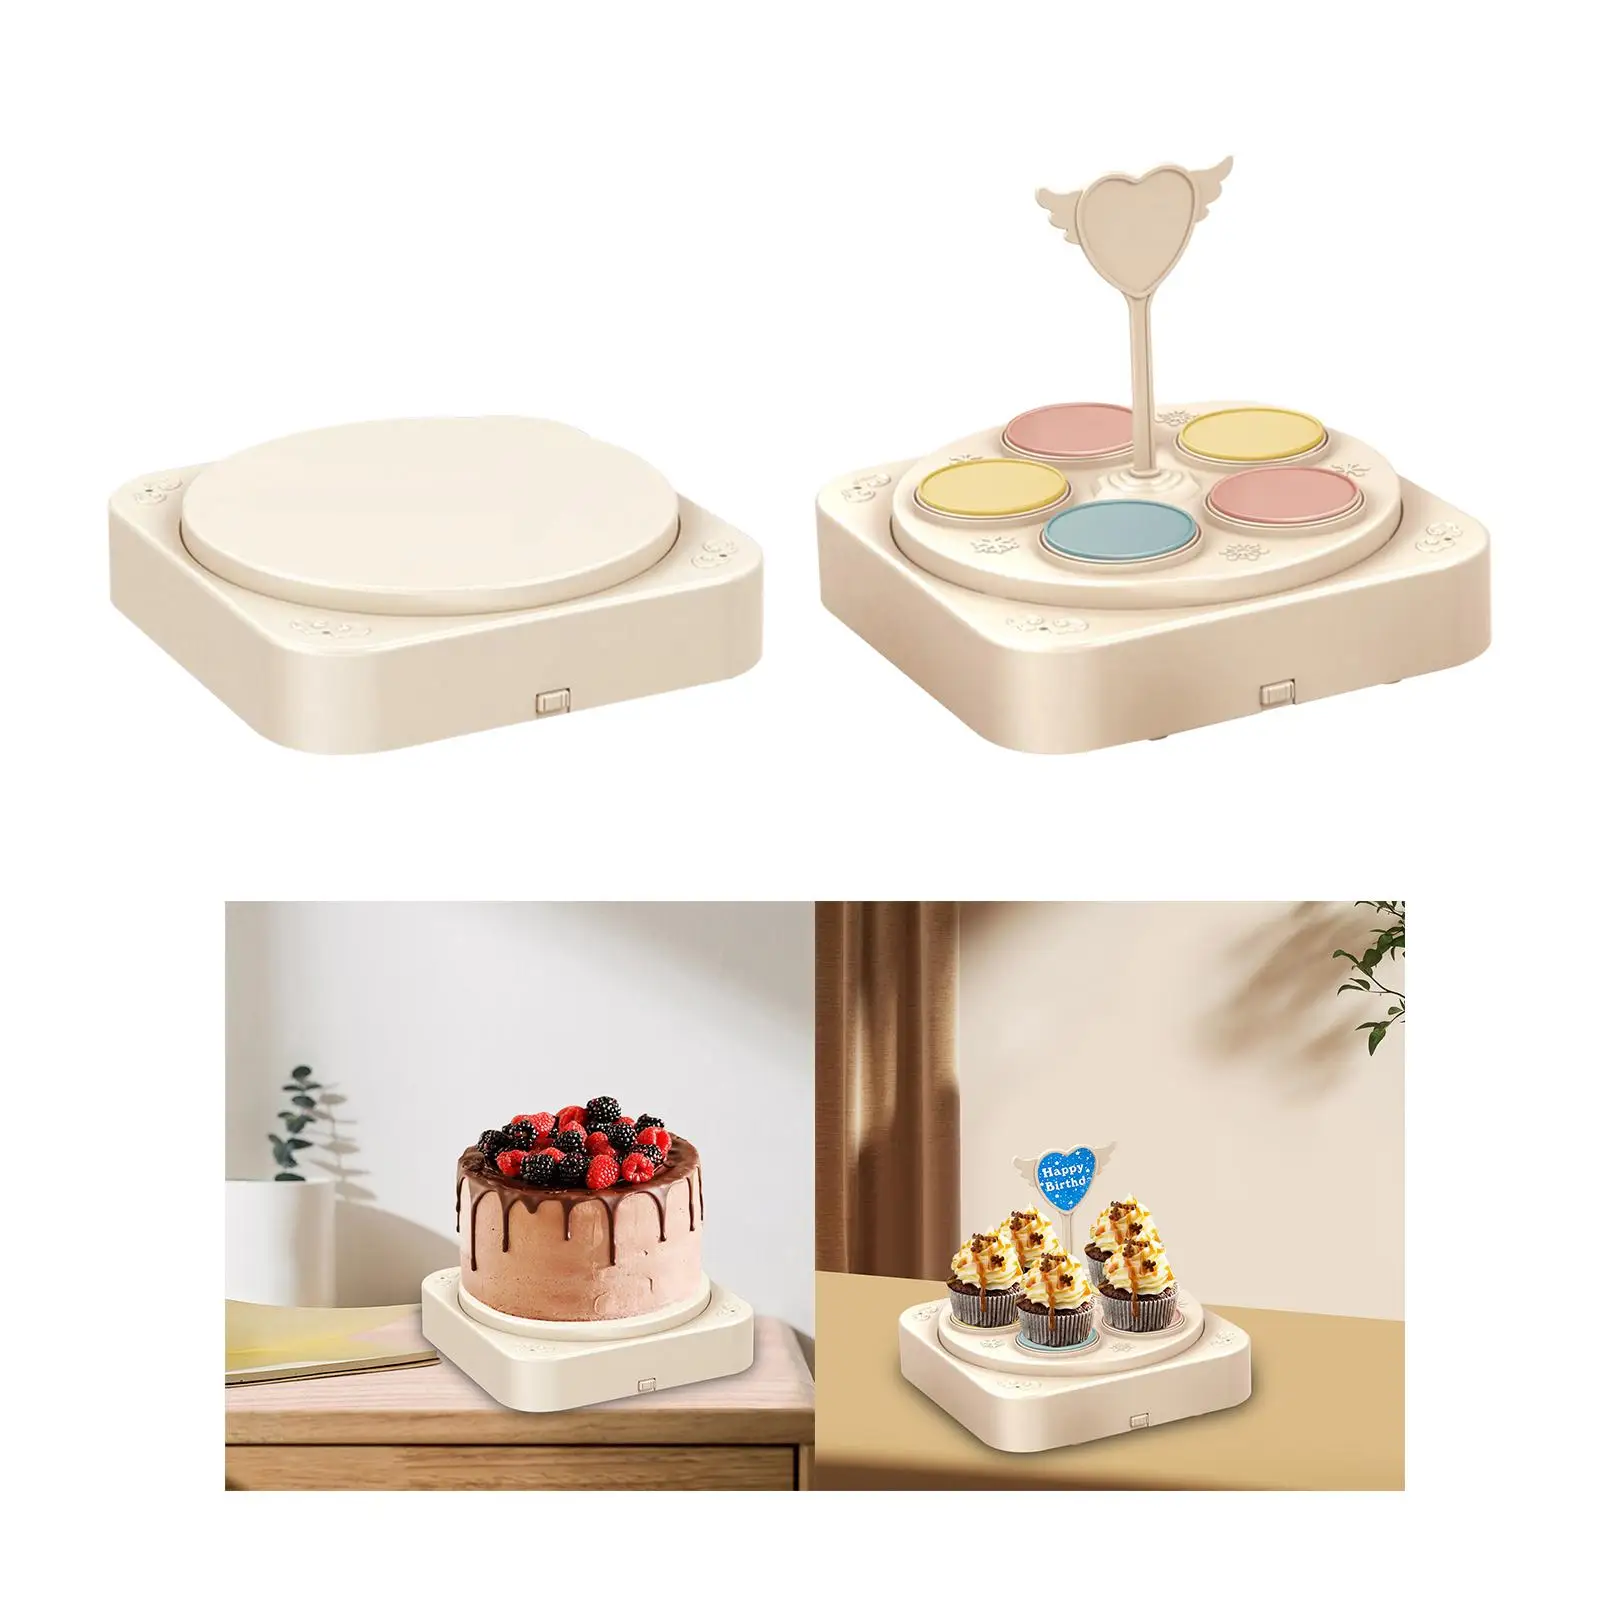 Rotary Baking Display Tray Cake Stand with Music Cake turnable for Gift Baking Wedding